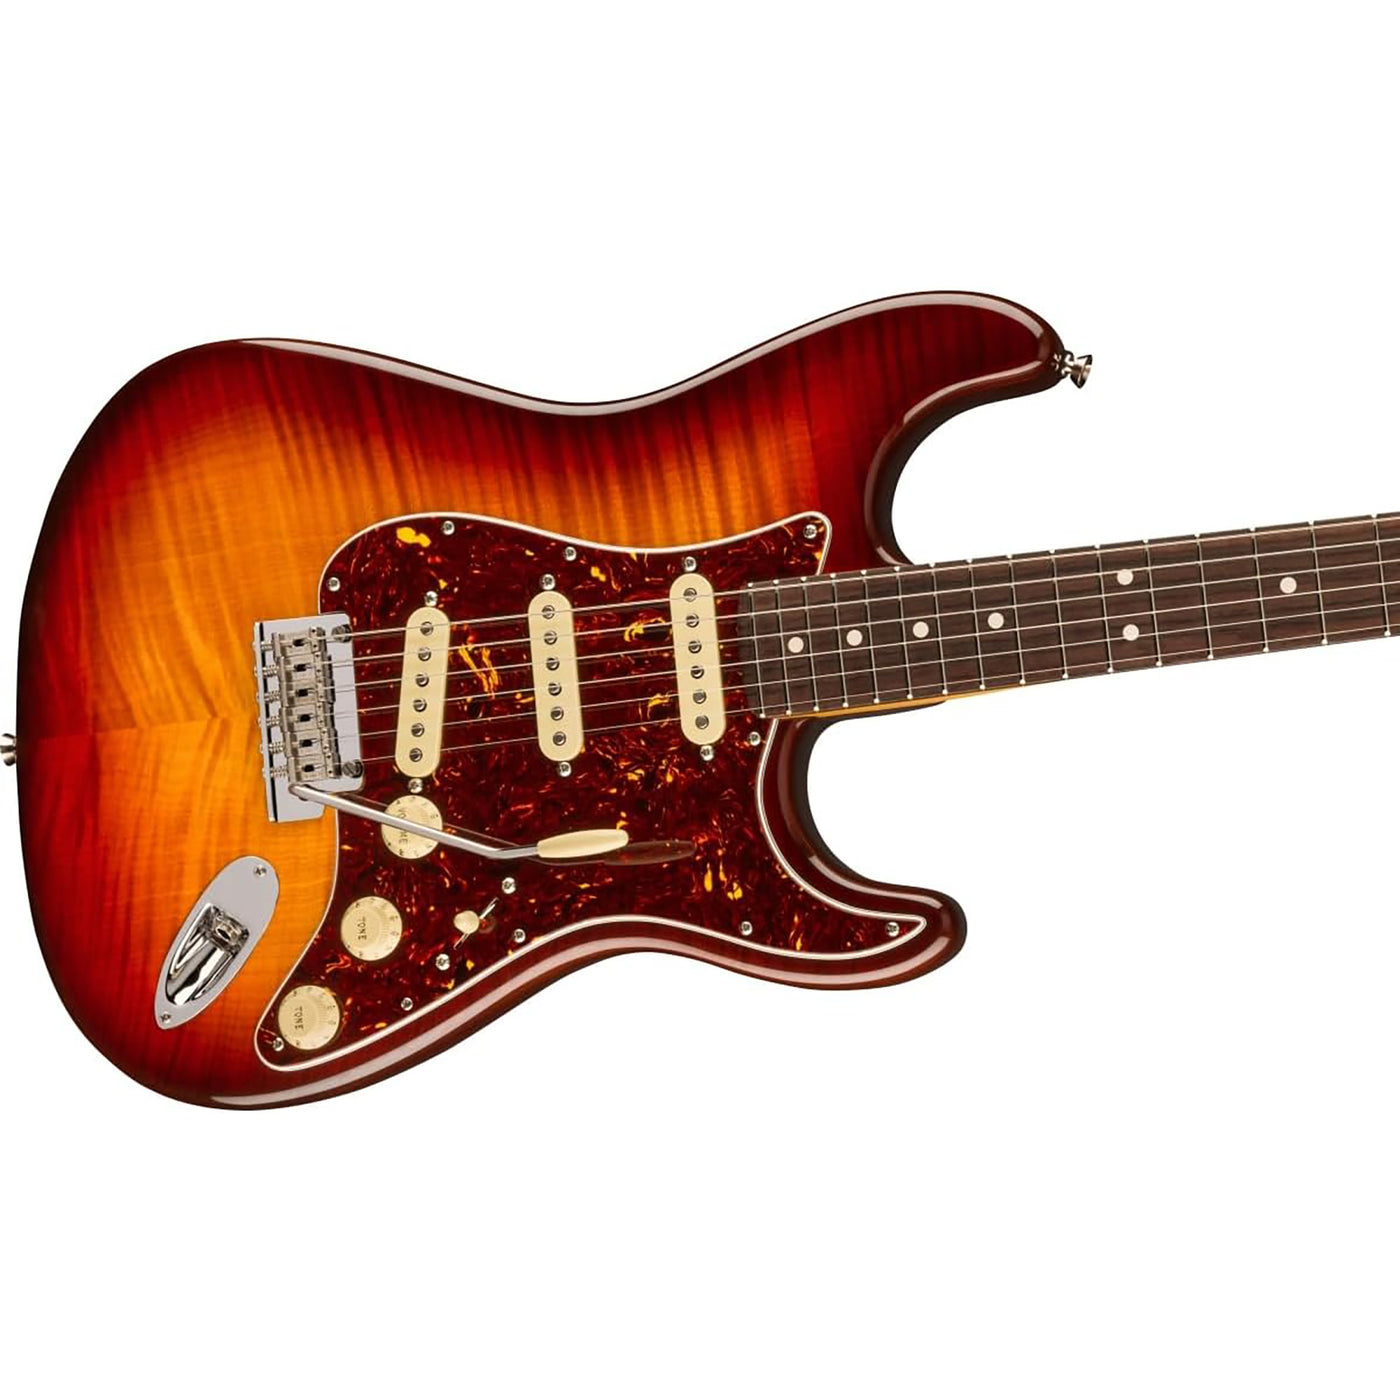 Fender 70th-Anniversary American Professional II Stratocaster Electric Guitar with Rosewood Fingerboard - Comet Burst (0177000864)